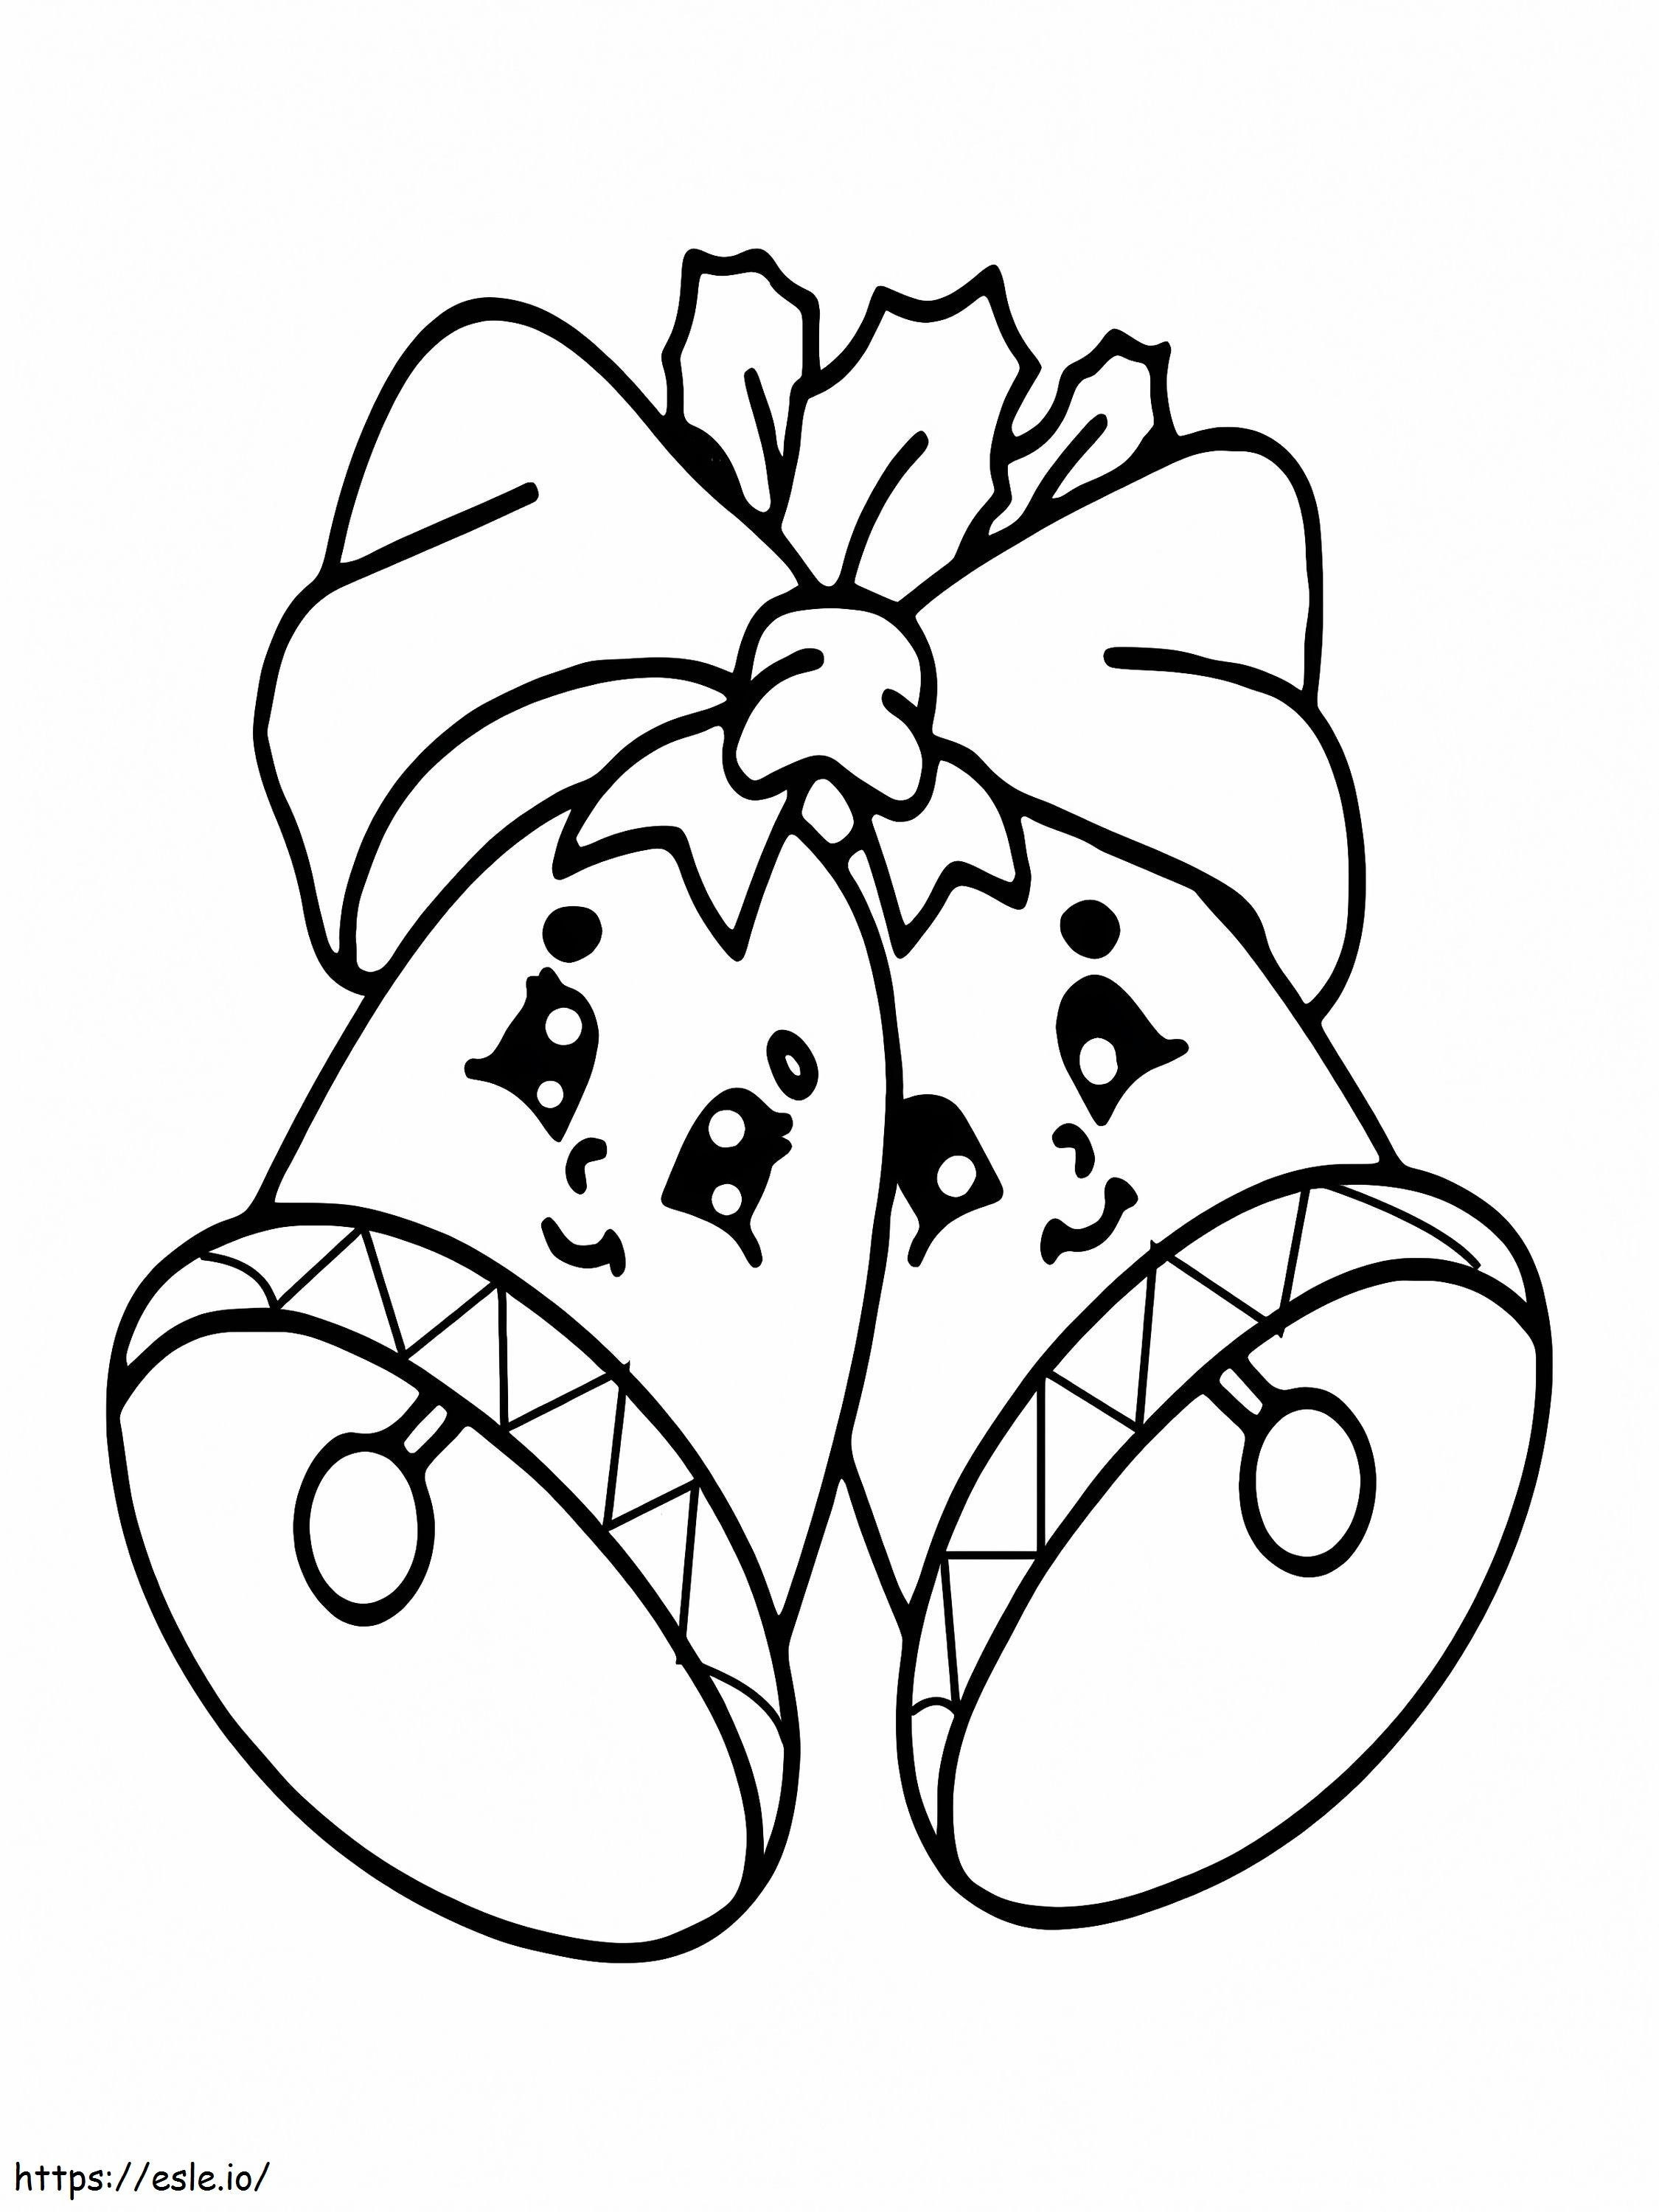 Christmas Bells With Smiling Faces coloring page